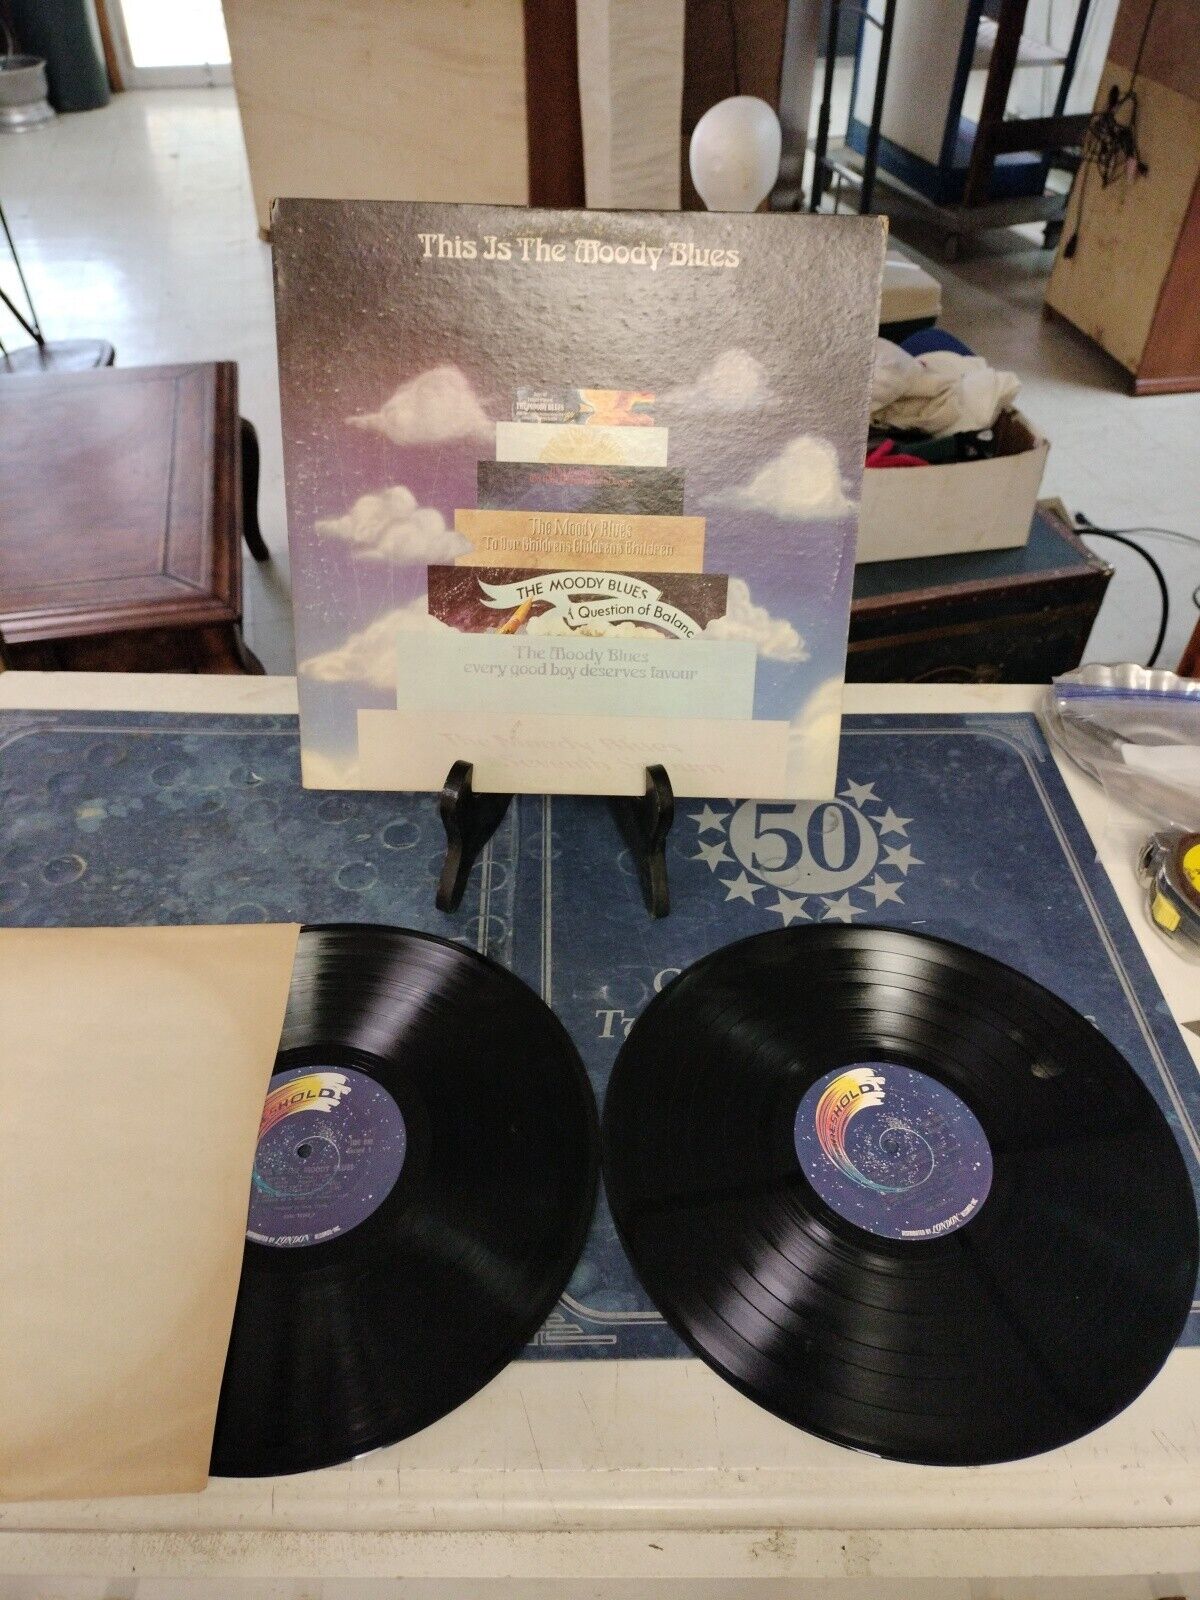 The Moody Blues "This Is The Moody Blues" 1974, 2xLP, 2THS12 Gatefold Tested VG+